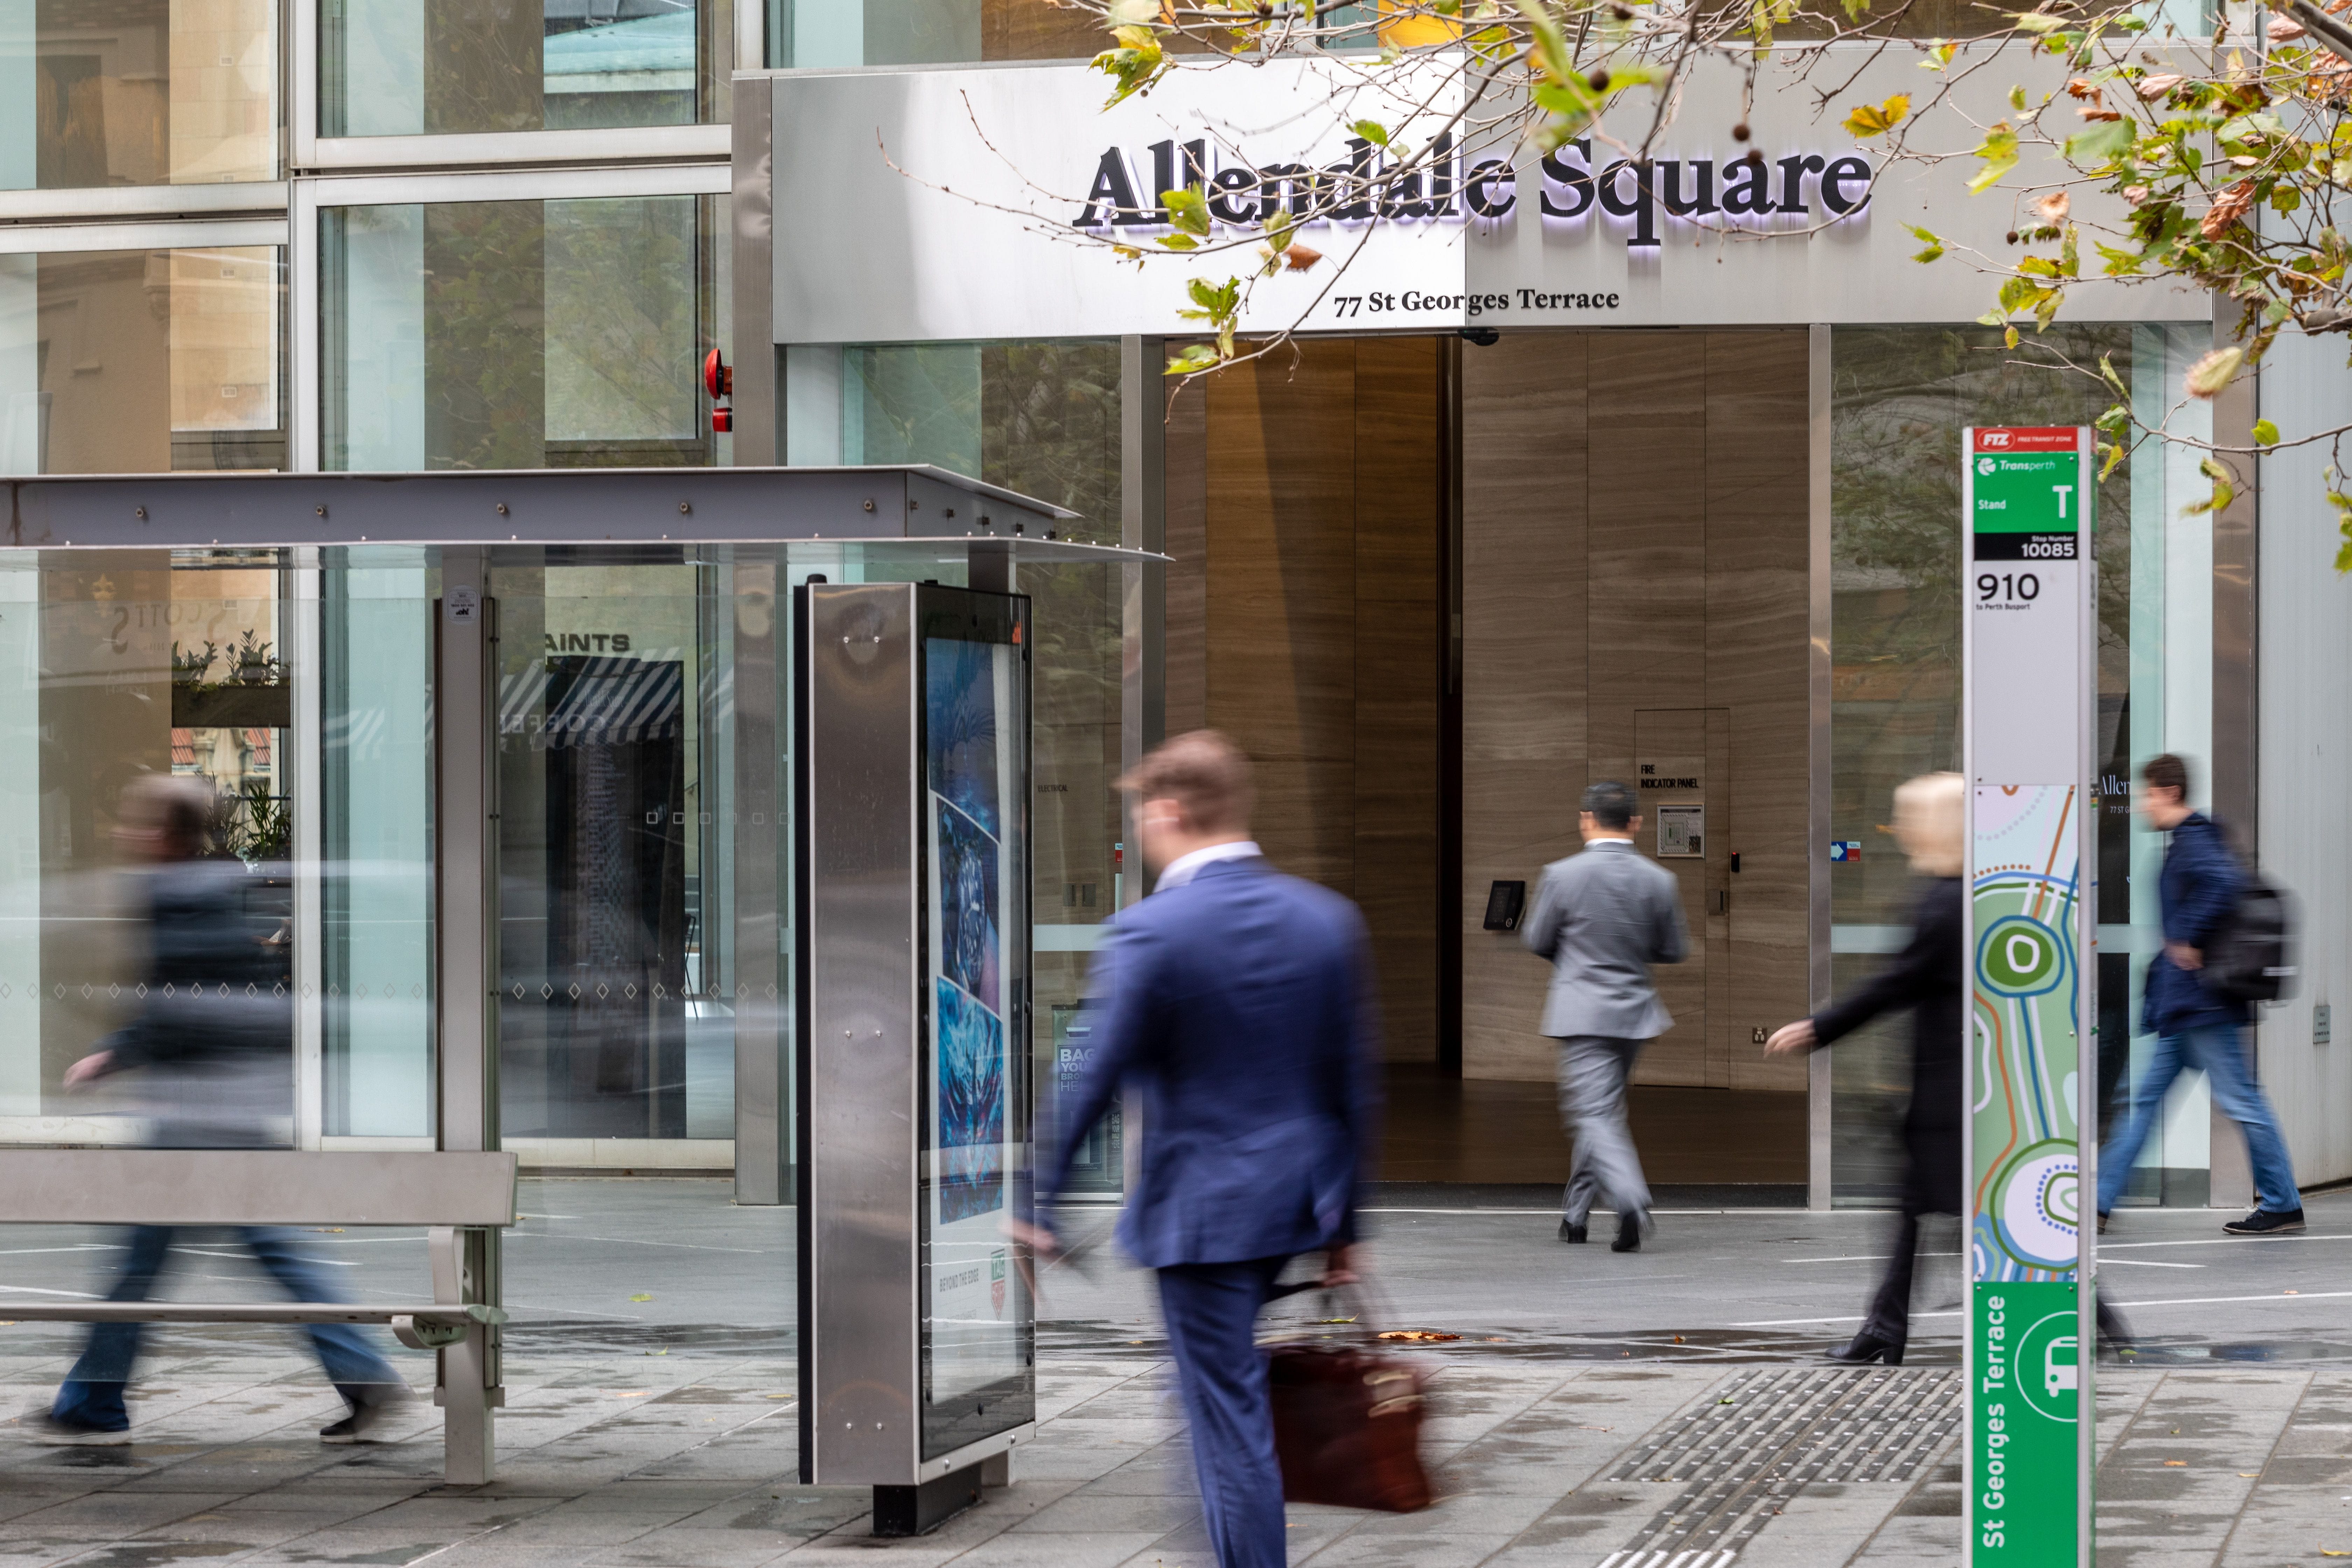 Centuria Capital, MA Financial join forces in $223m acquisition of Perth’s Allendale Square